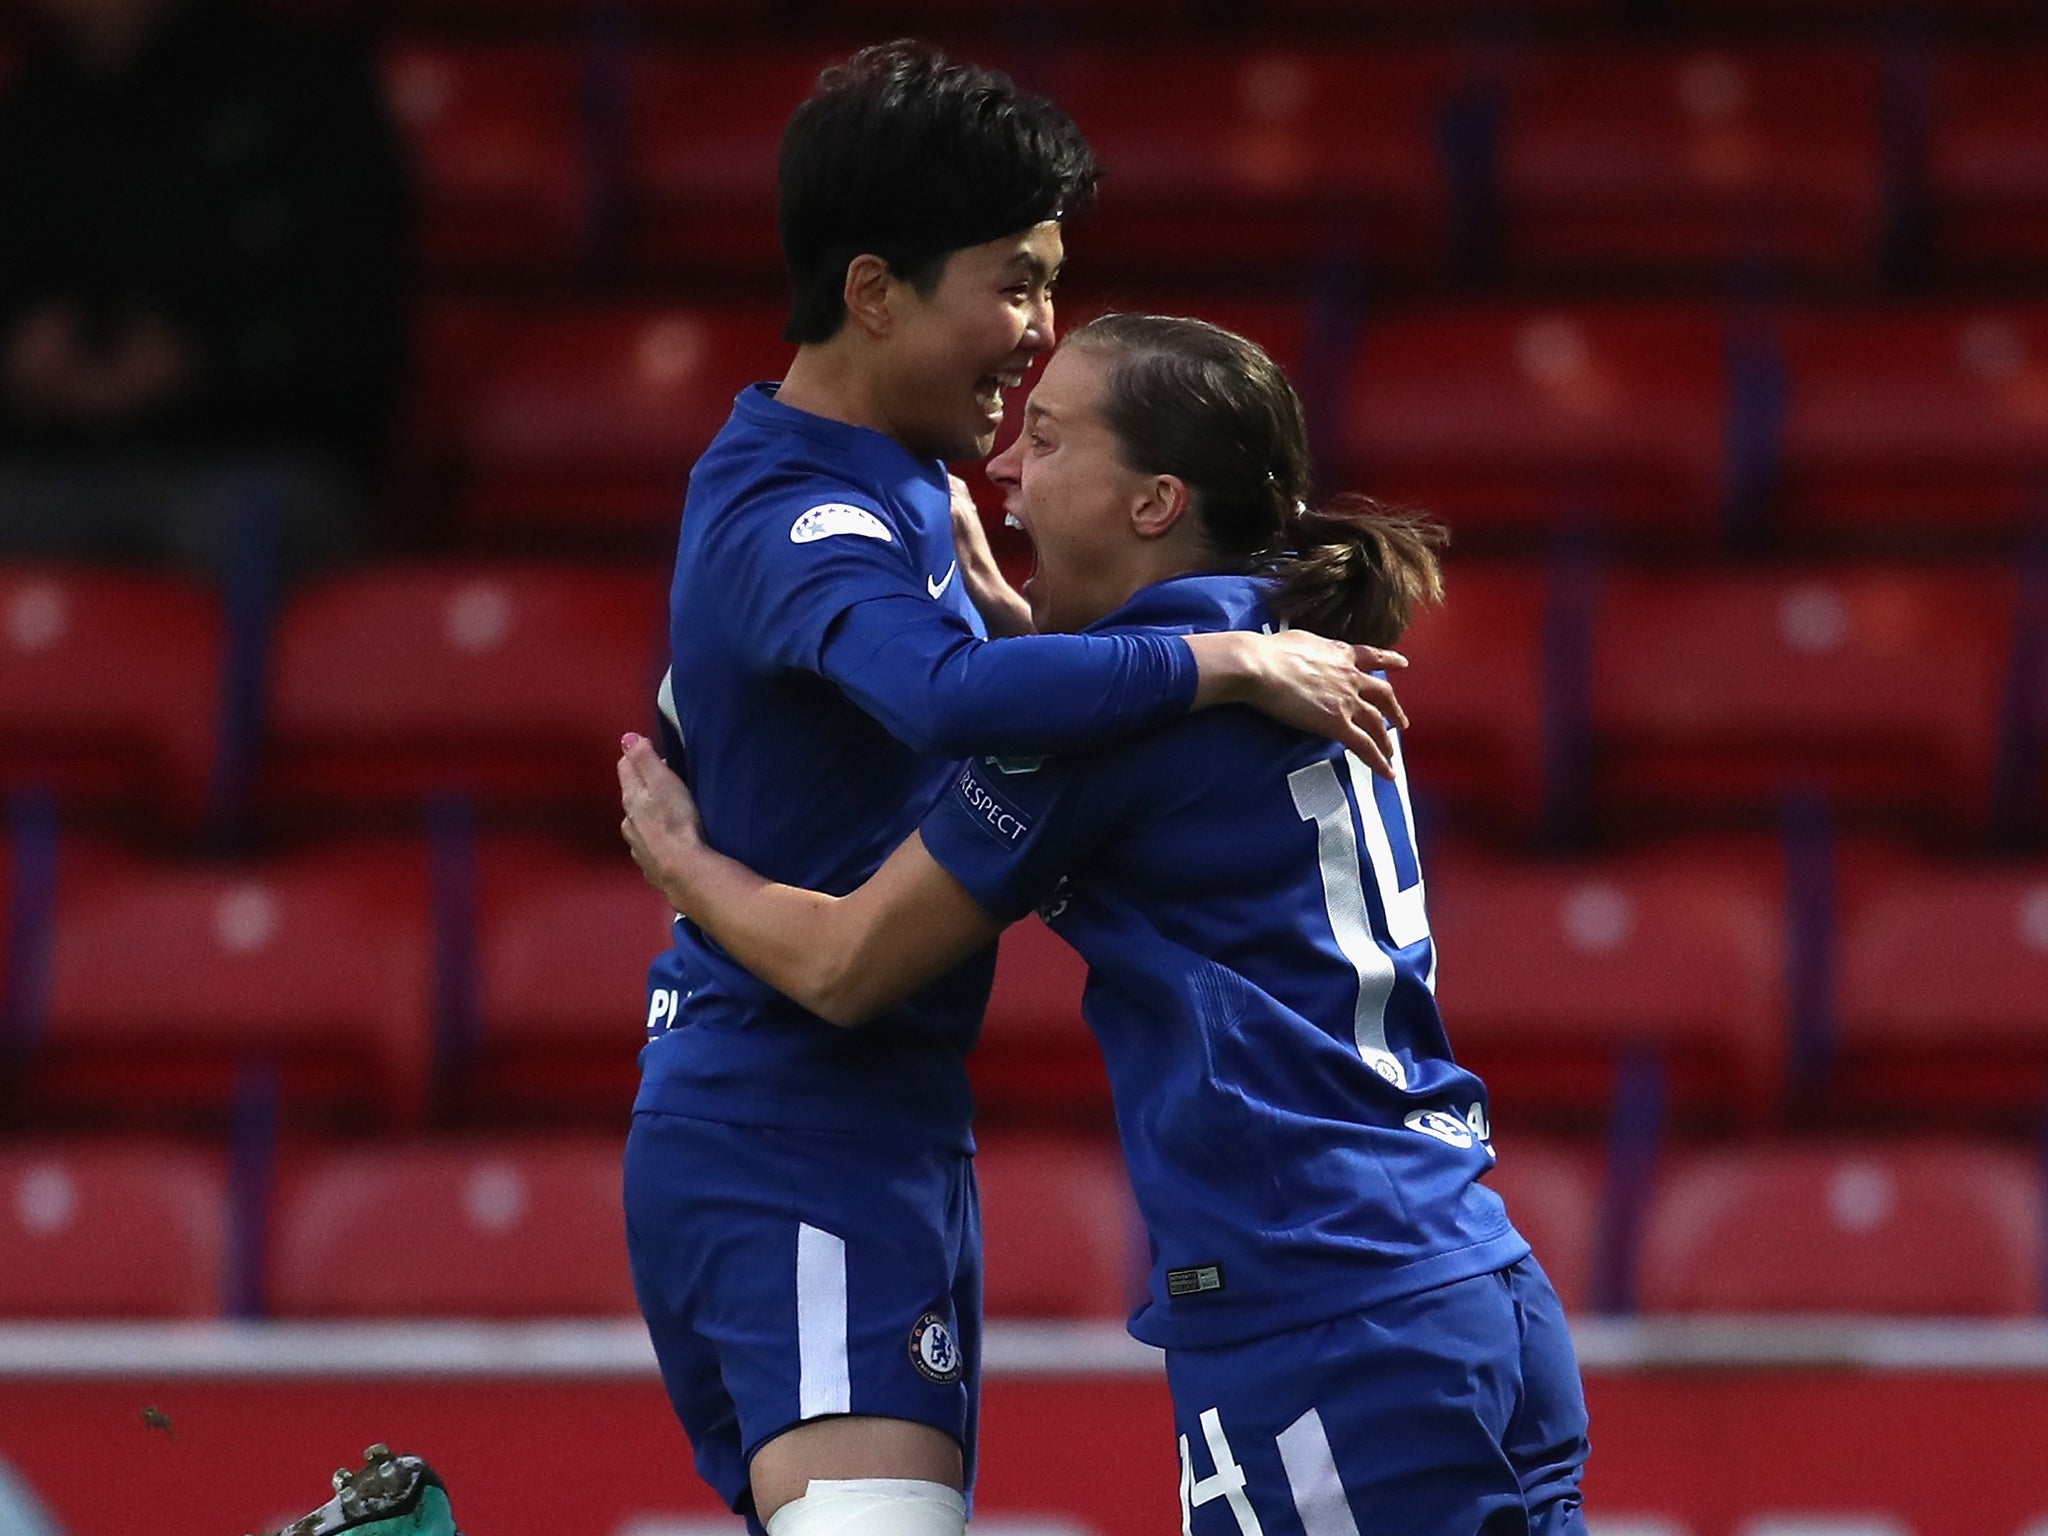 Fran Kirby scored twice to fire Chelsea into the Women's Champions League semi-finals